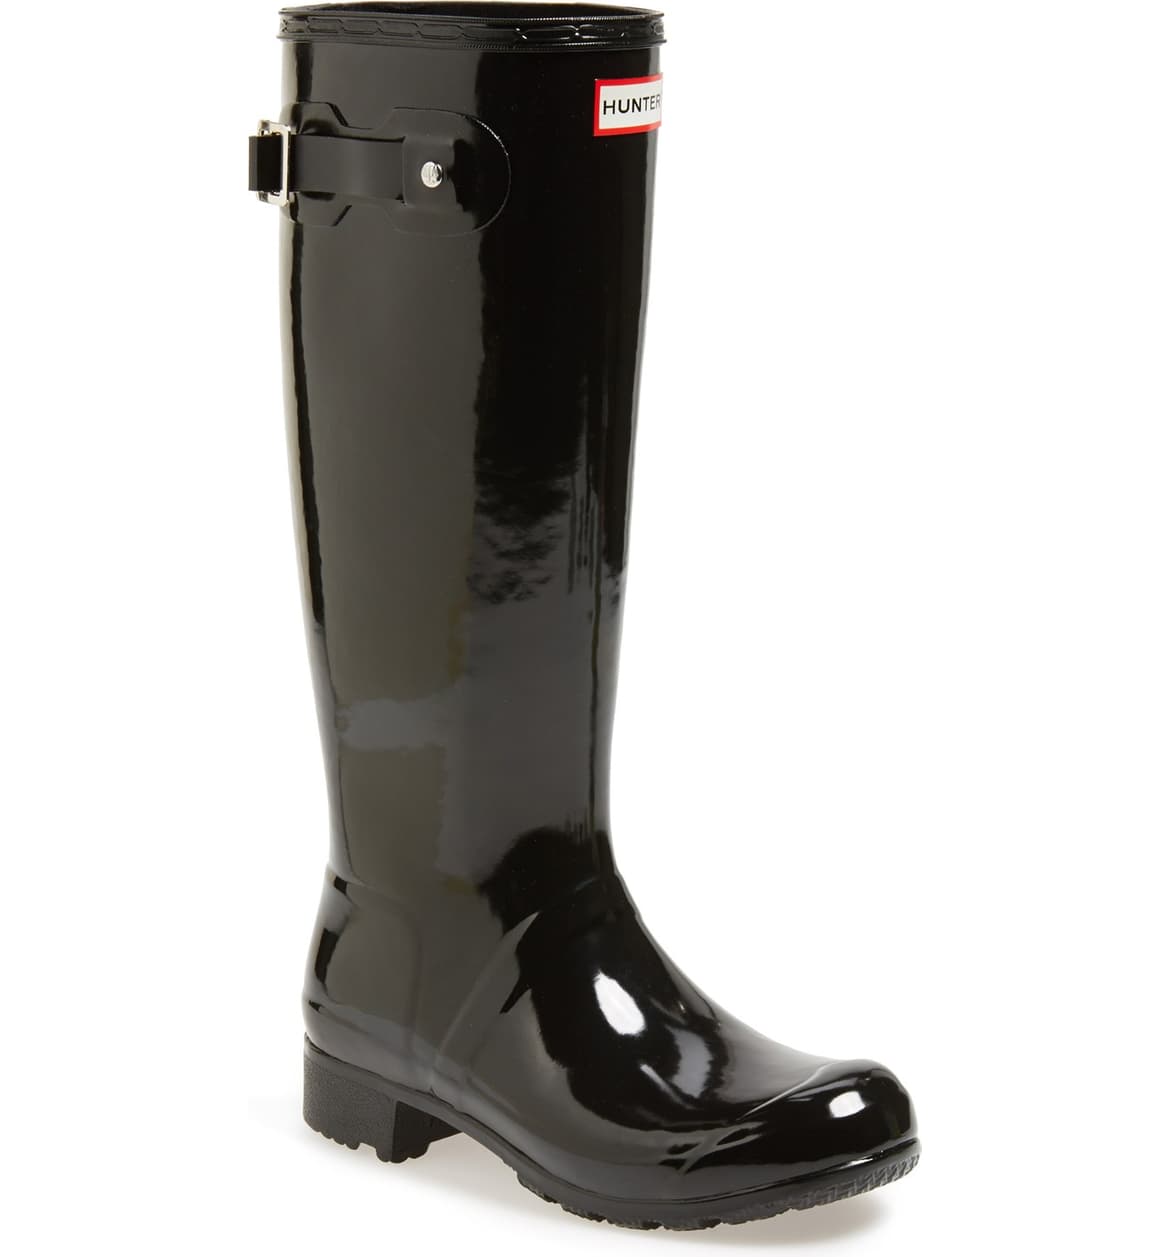 Buy Hunter Boots On Sale For $99 For 